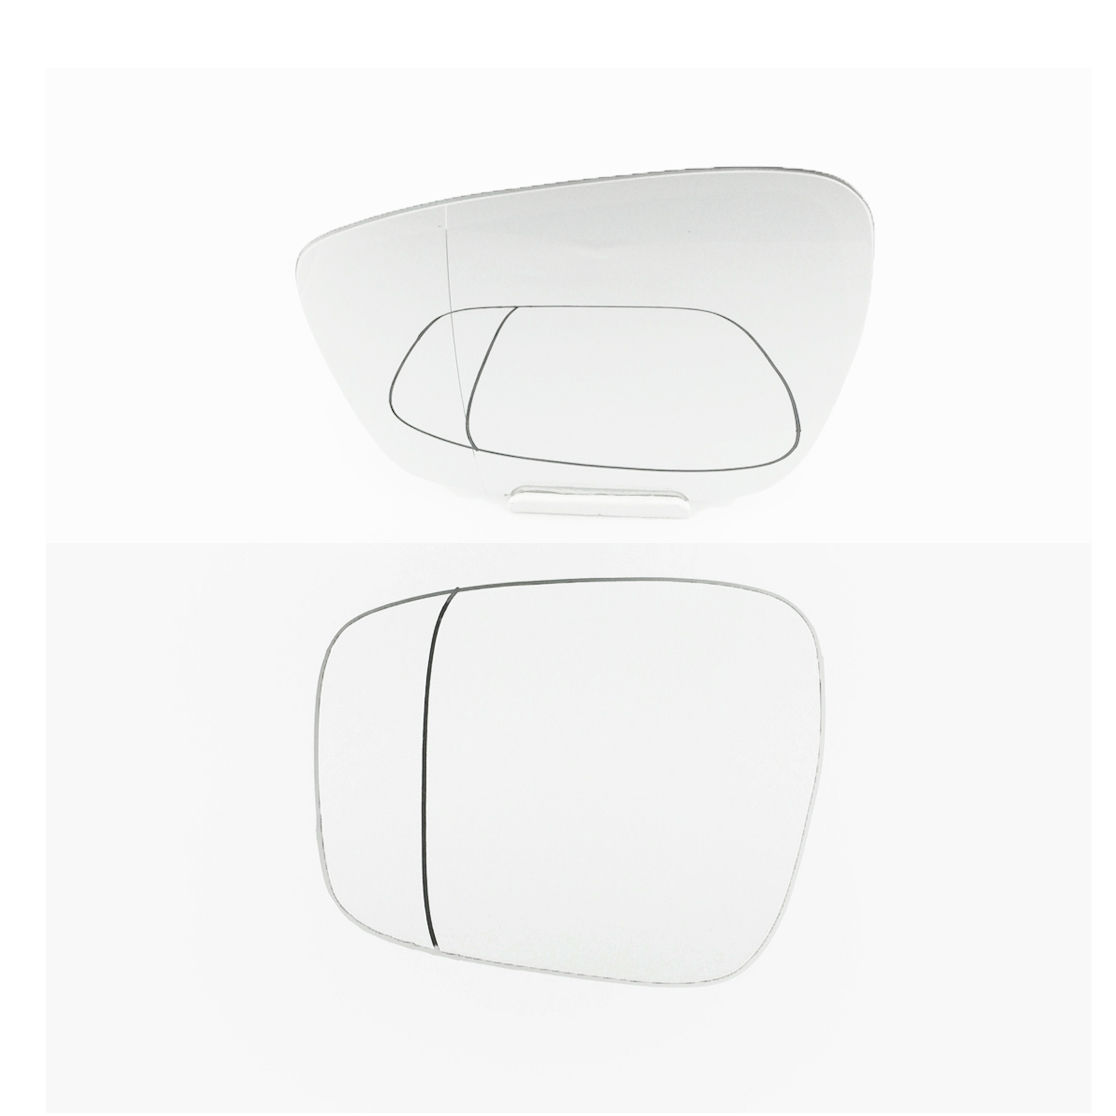 Vauxhall Corsa Wing Mirror Glass RIGHT HAND ( UK Driver Side ) 2020 Onward – Convex Wing Mirror